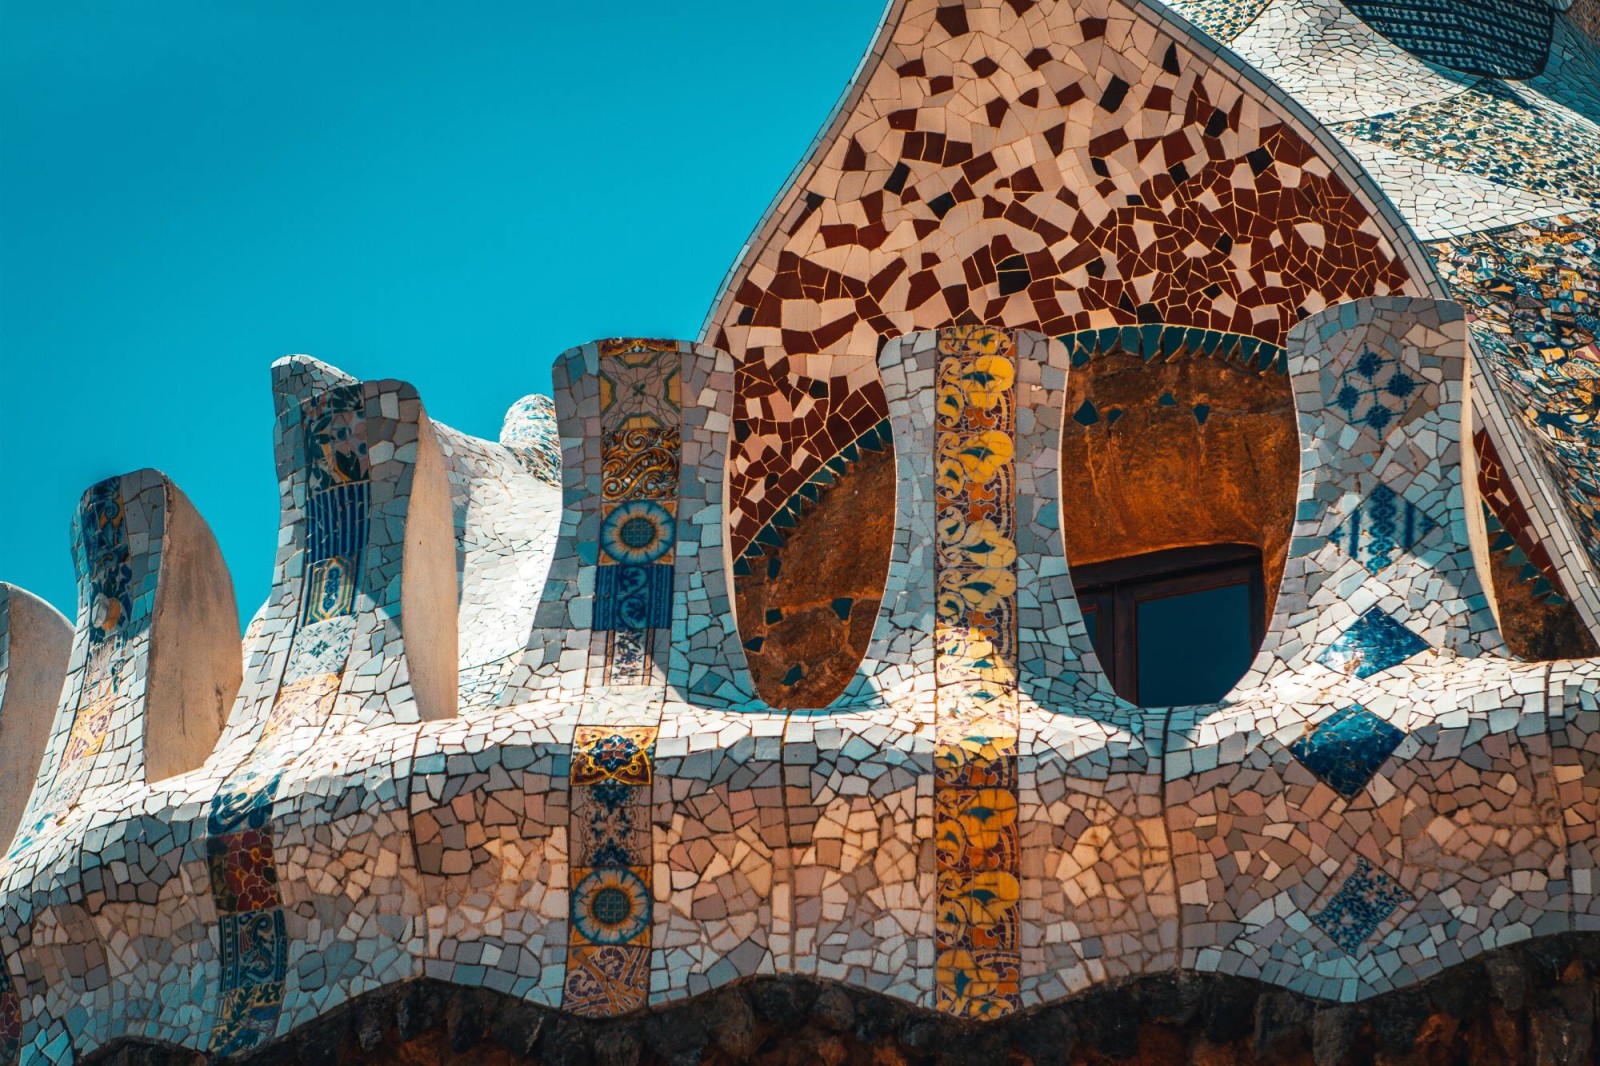 Close up of colorful mosaic and organic shapes of Antoni Gaudi's work at Park Guell in Barcelona.